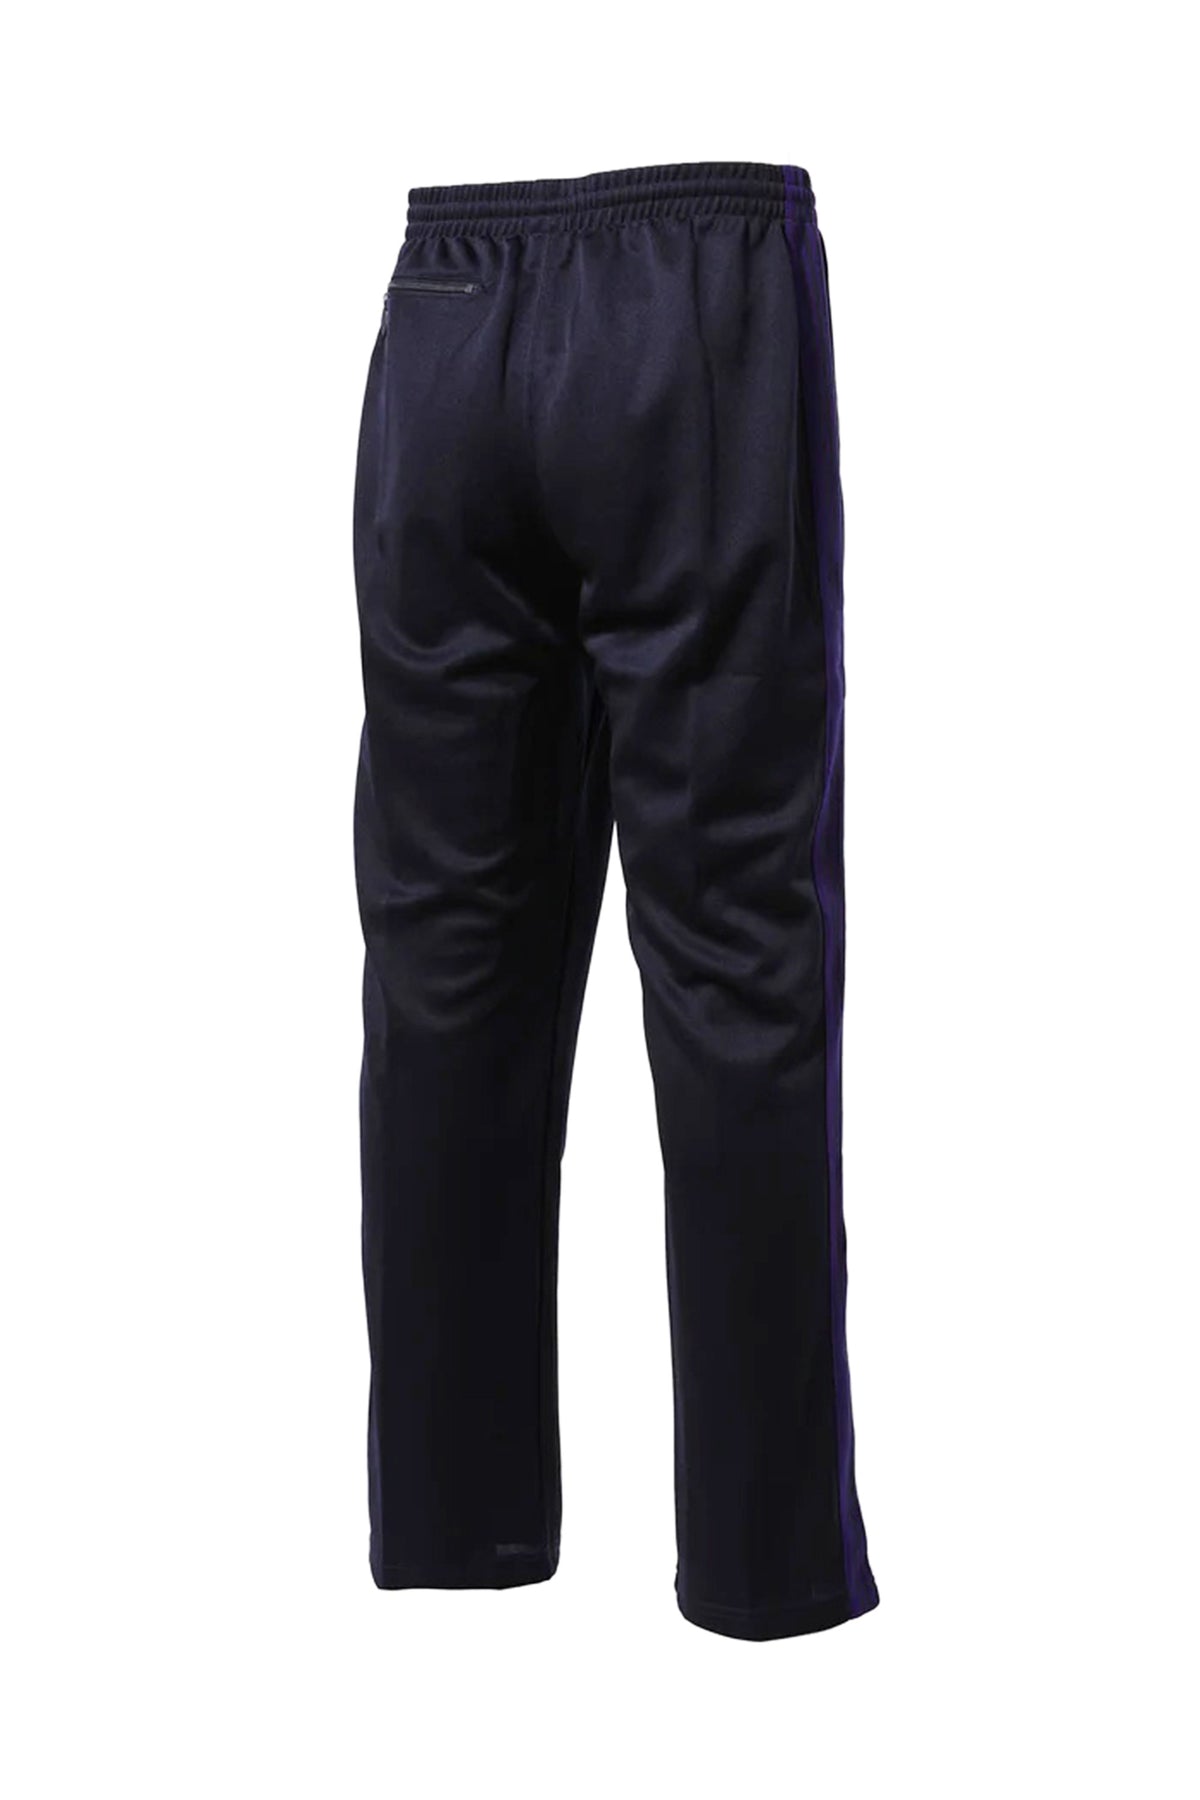 TRACK PANT - POLY SMOOTH / NVY